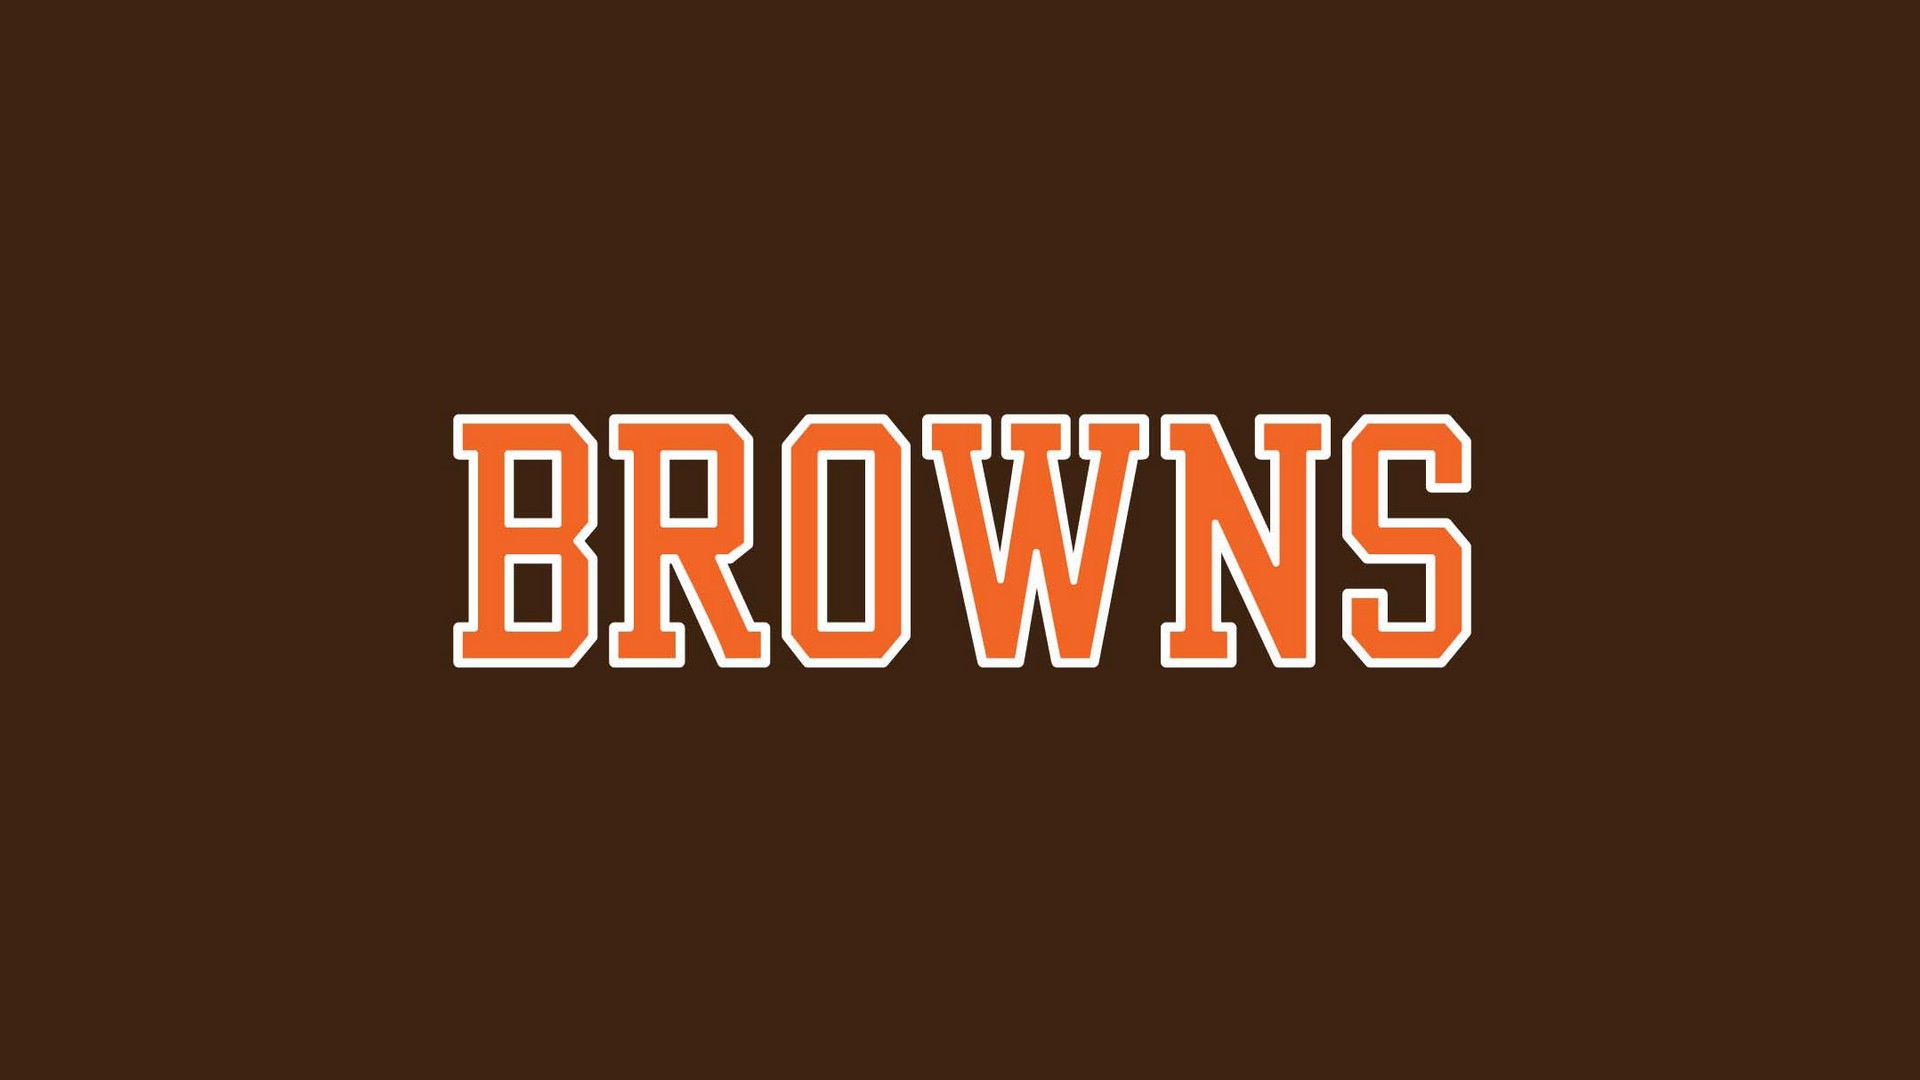 Hd Cleveland Browns Wallpapers - Cleveland Browns - HD Wallpaper 